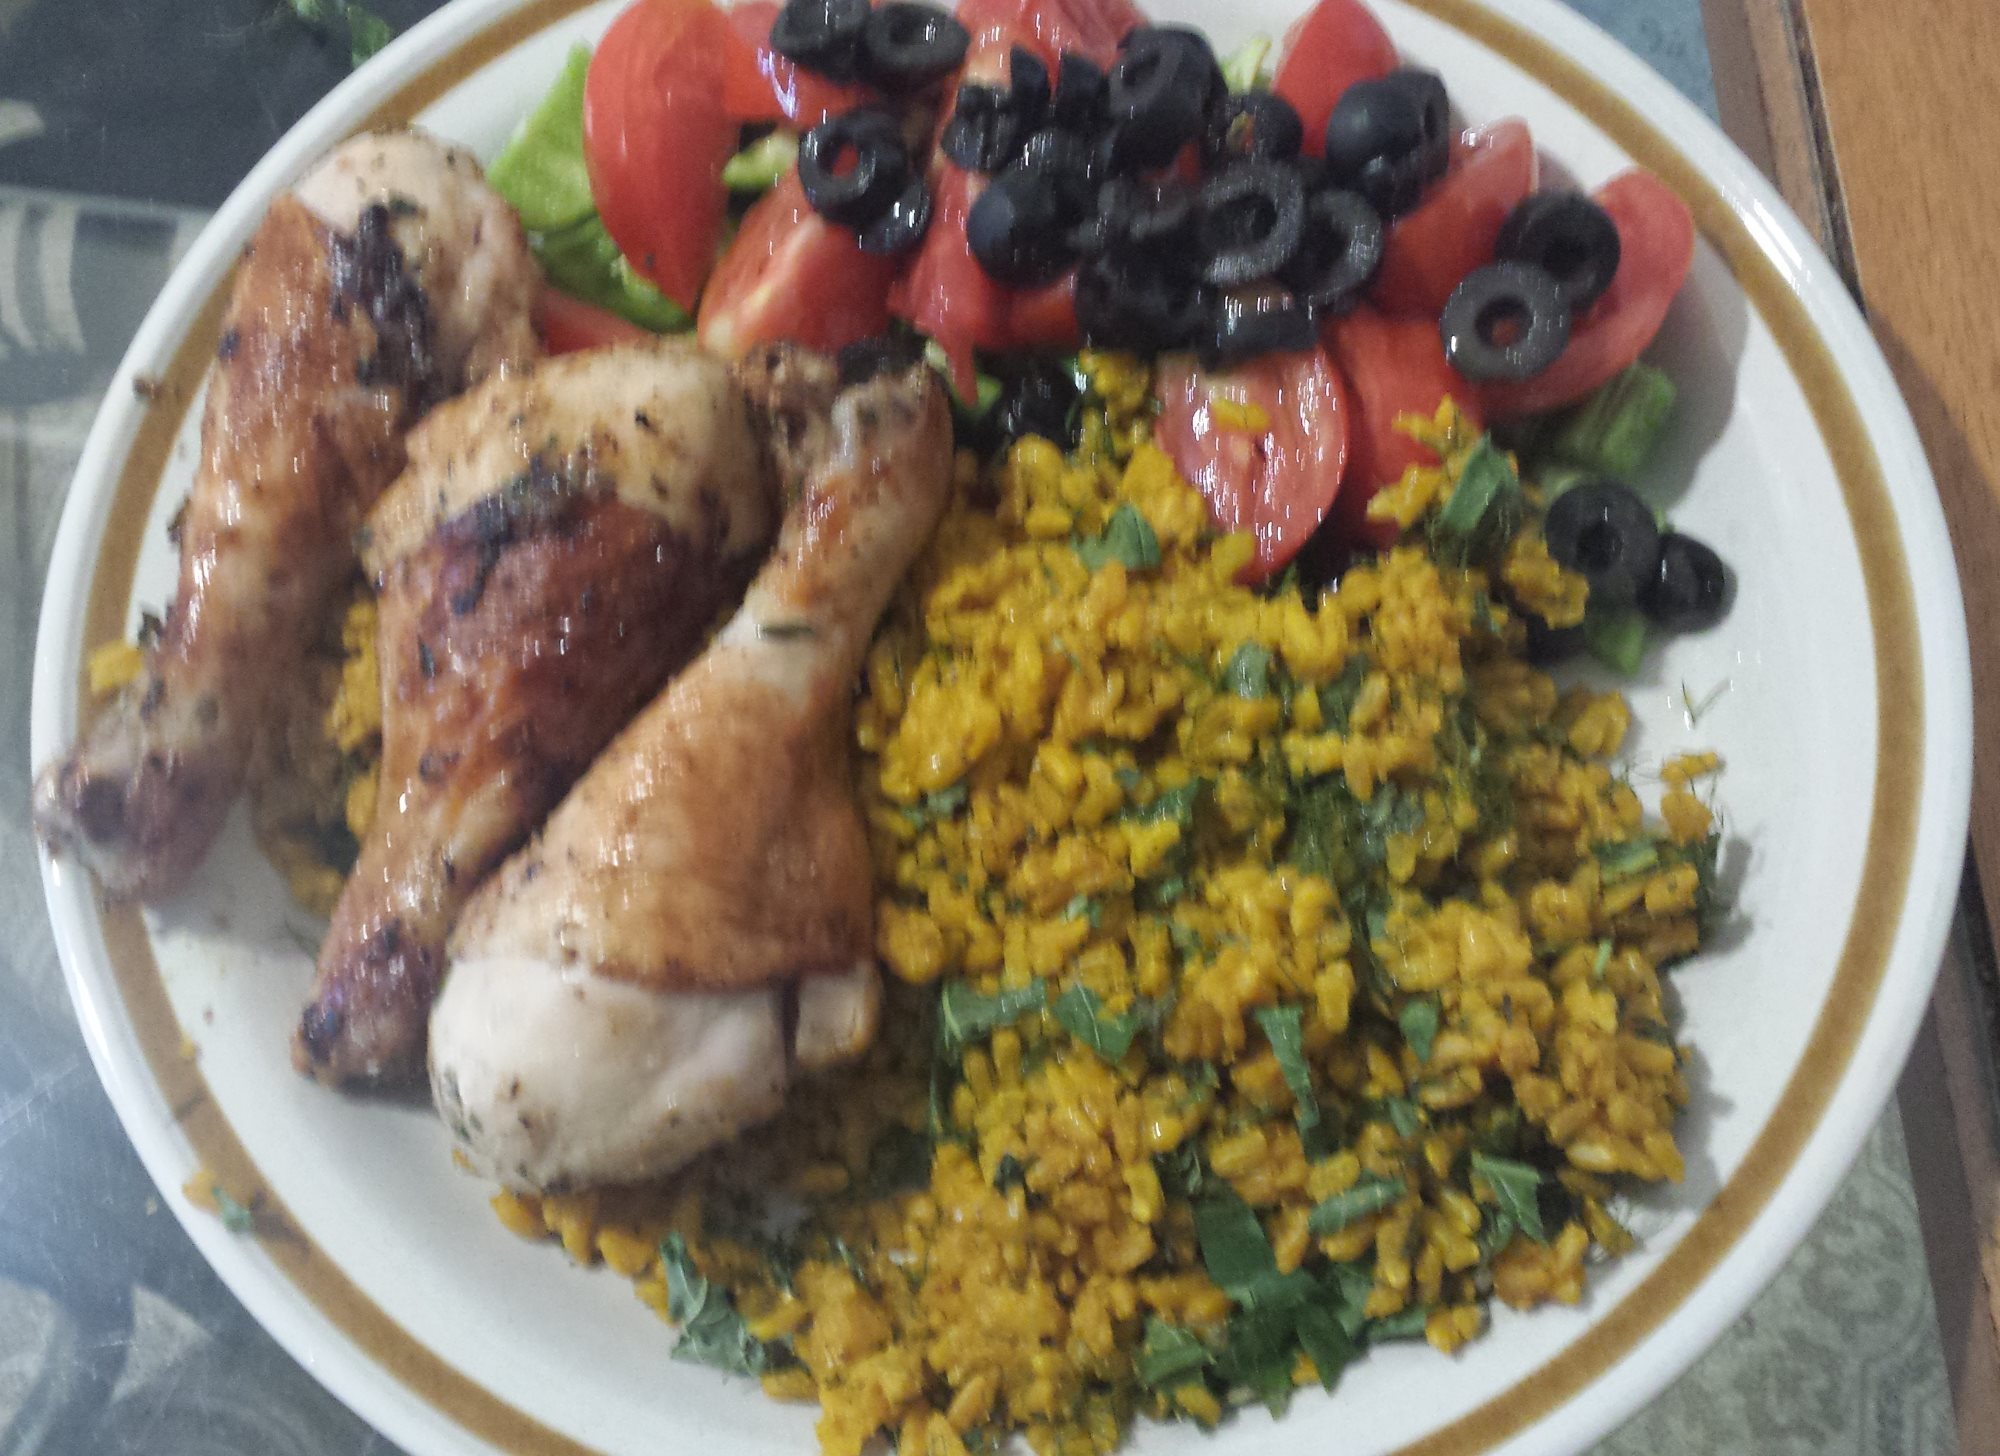 Barbecued chicken drumstick dinner with brown rice and freshly picked salad ingredients - Photo by popular fitness